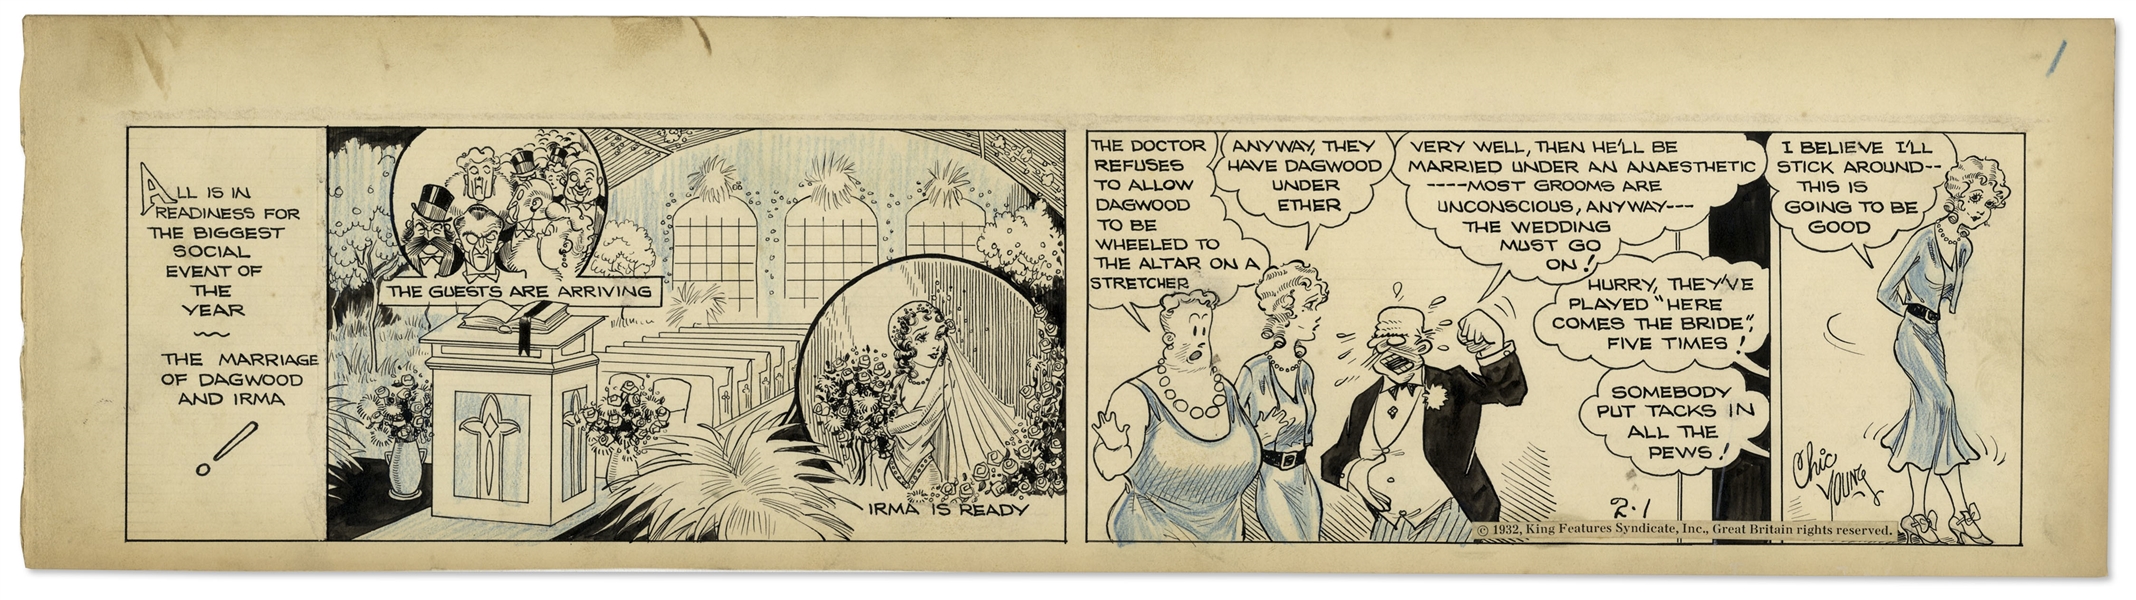 Chic Young Hand-Drawn ''Blondie'' Comic Strip From 1932 Titled ''The Curtain Call'' -- Dagwood Is on the Verge of Marrying Blondie's Roommate Irma!